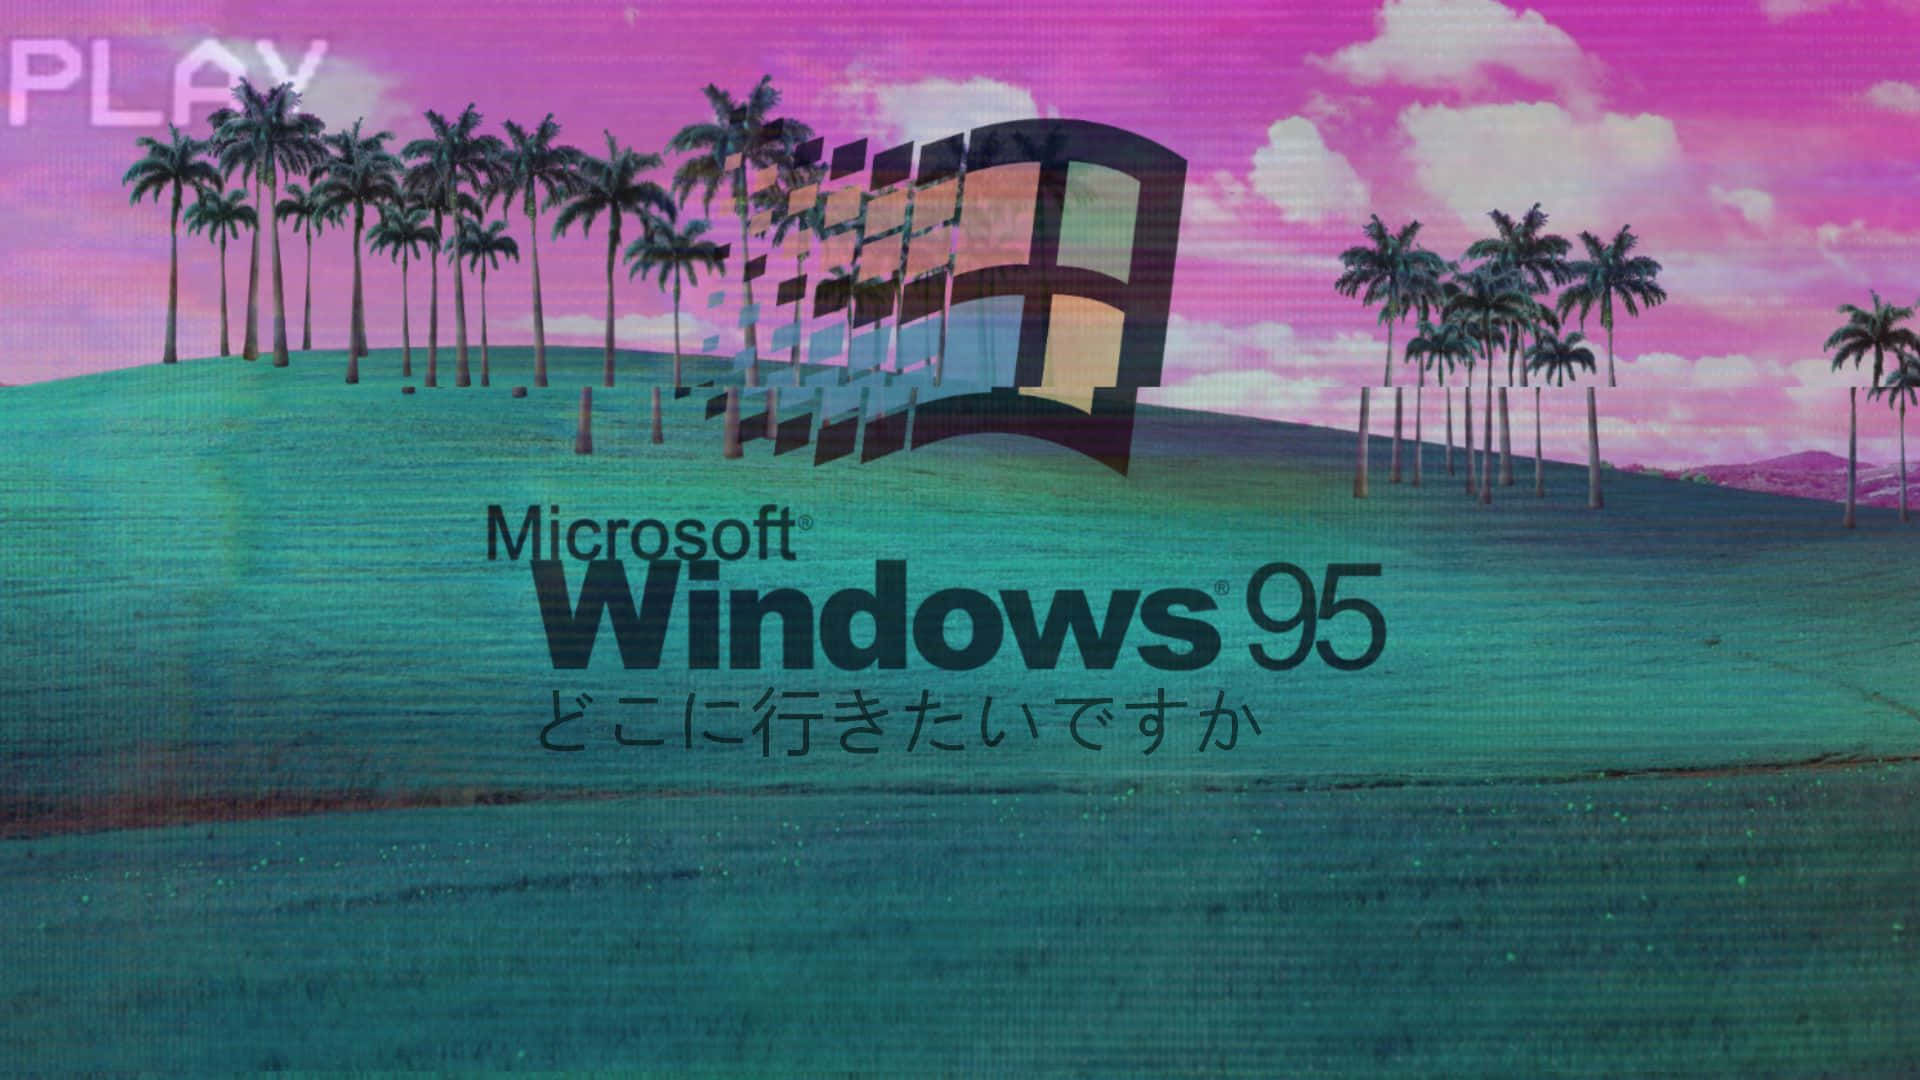 Windows 95 Logo With Palm Trees Wallpaper